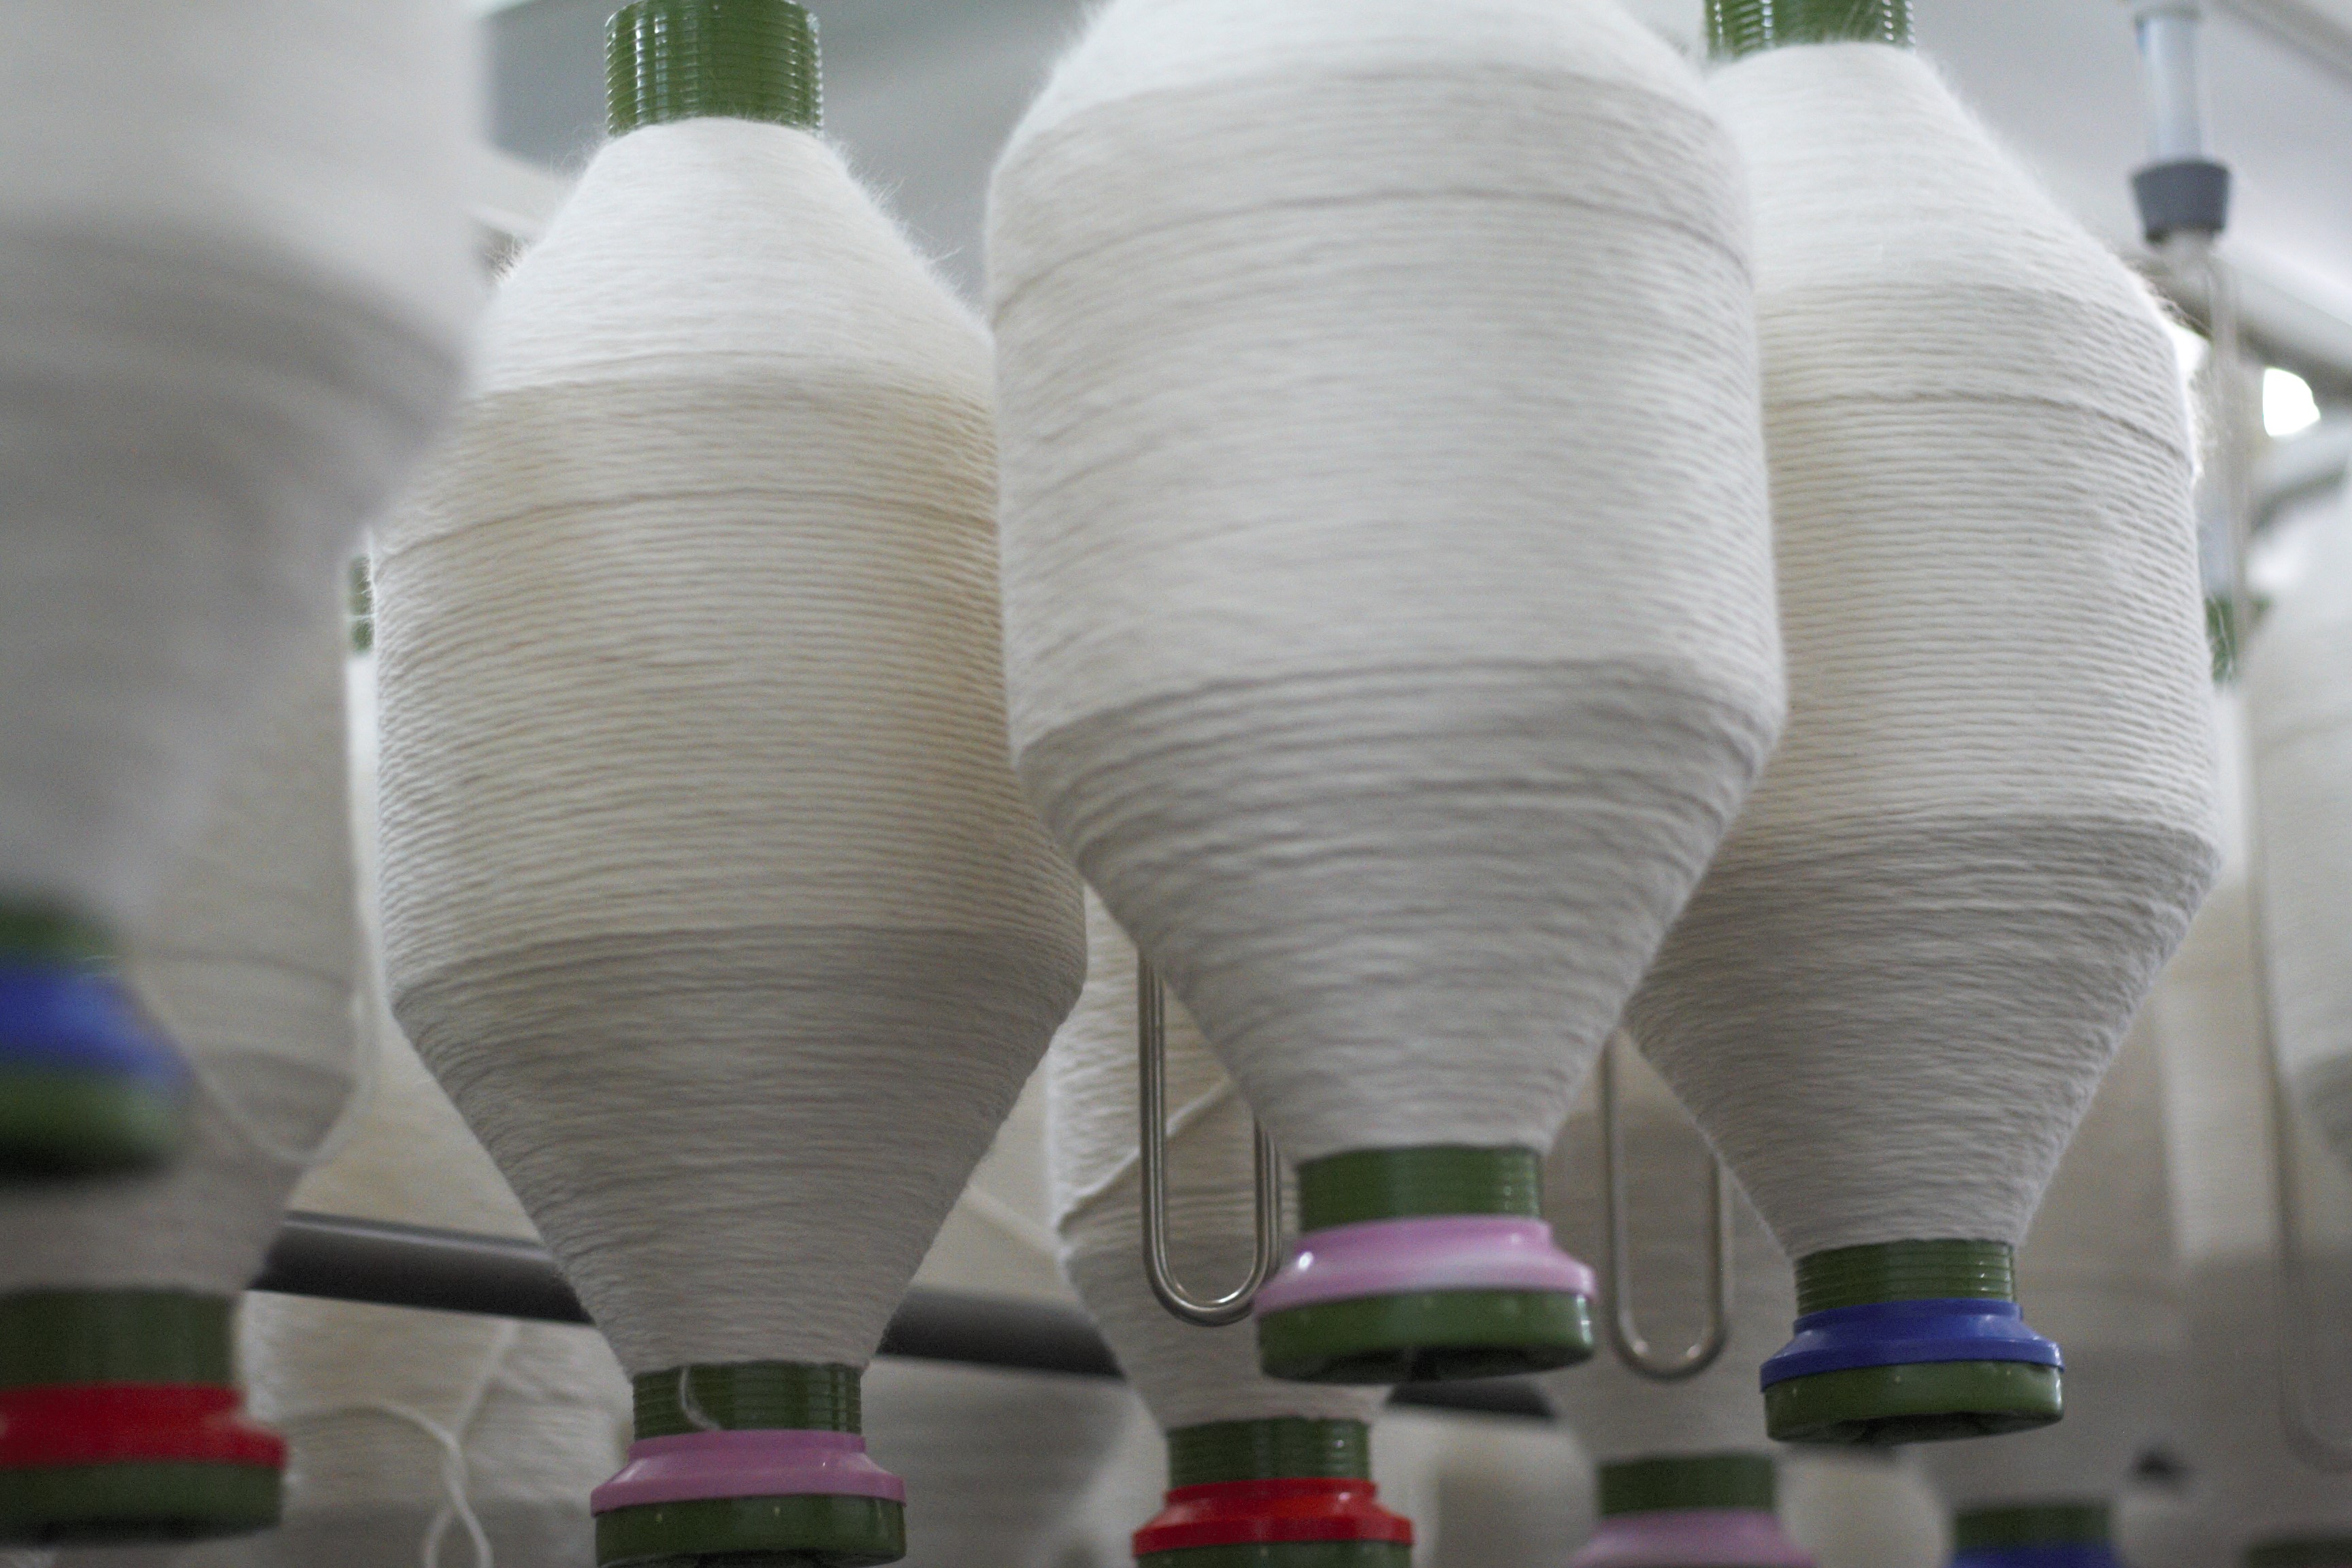 Yarn is ready to be weaved into fabric